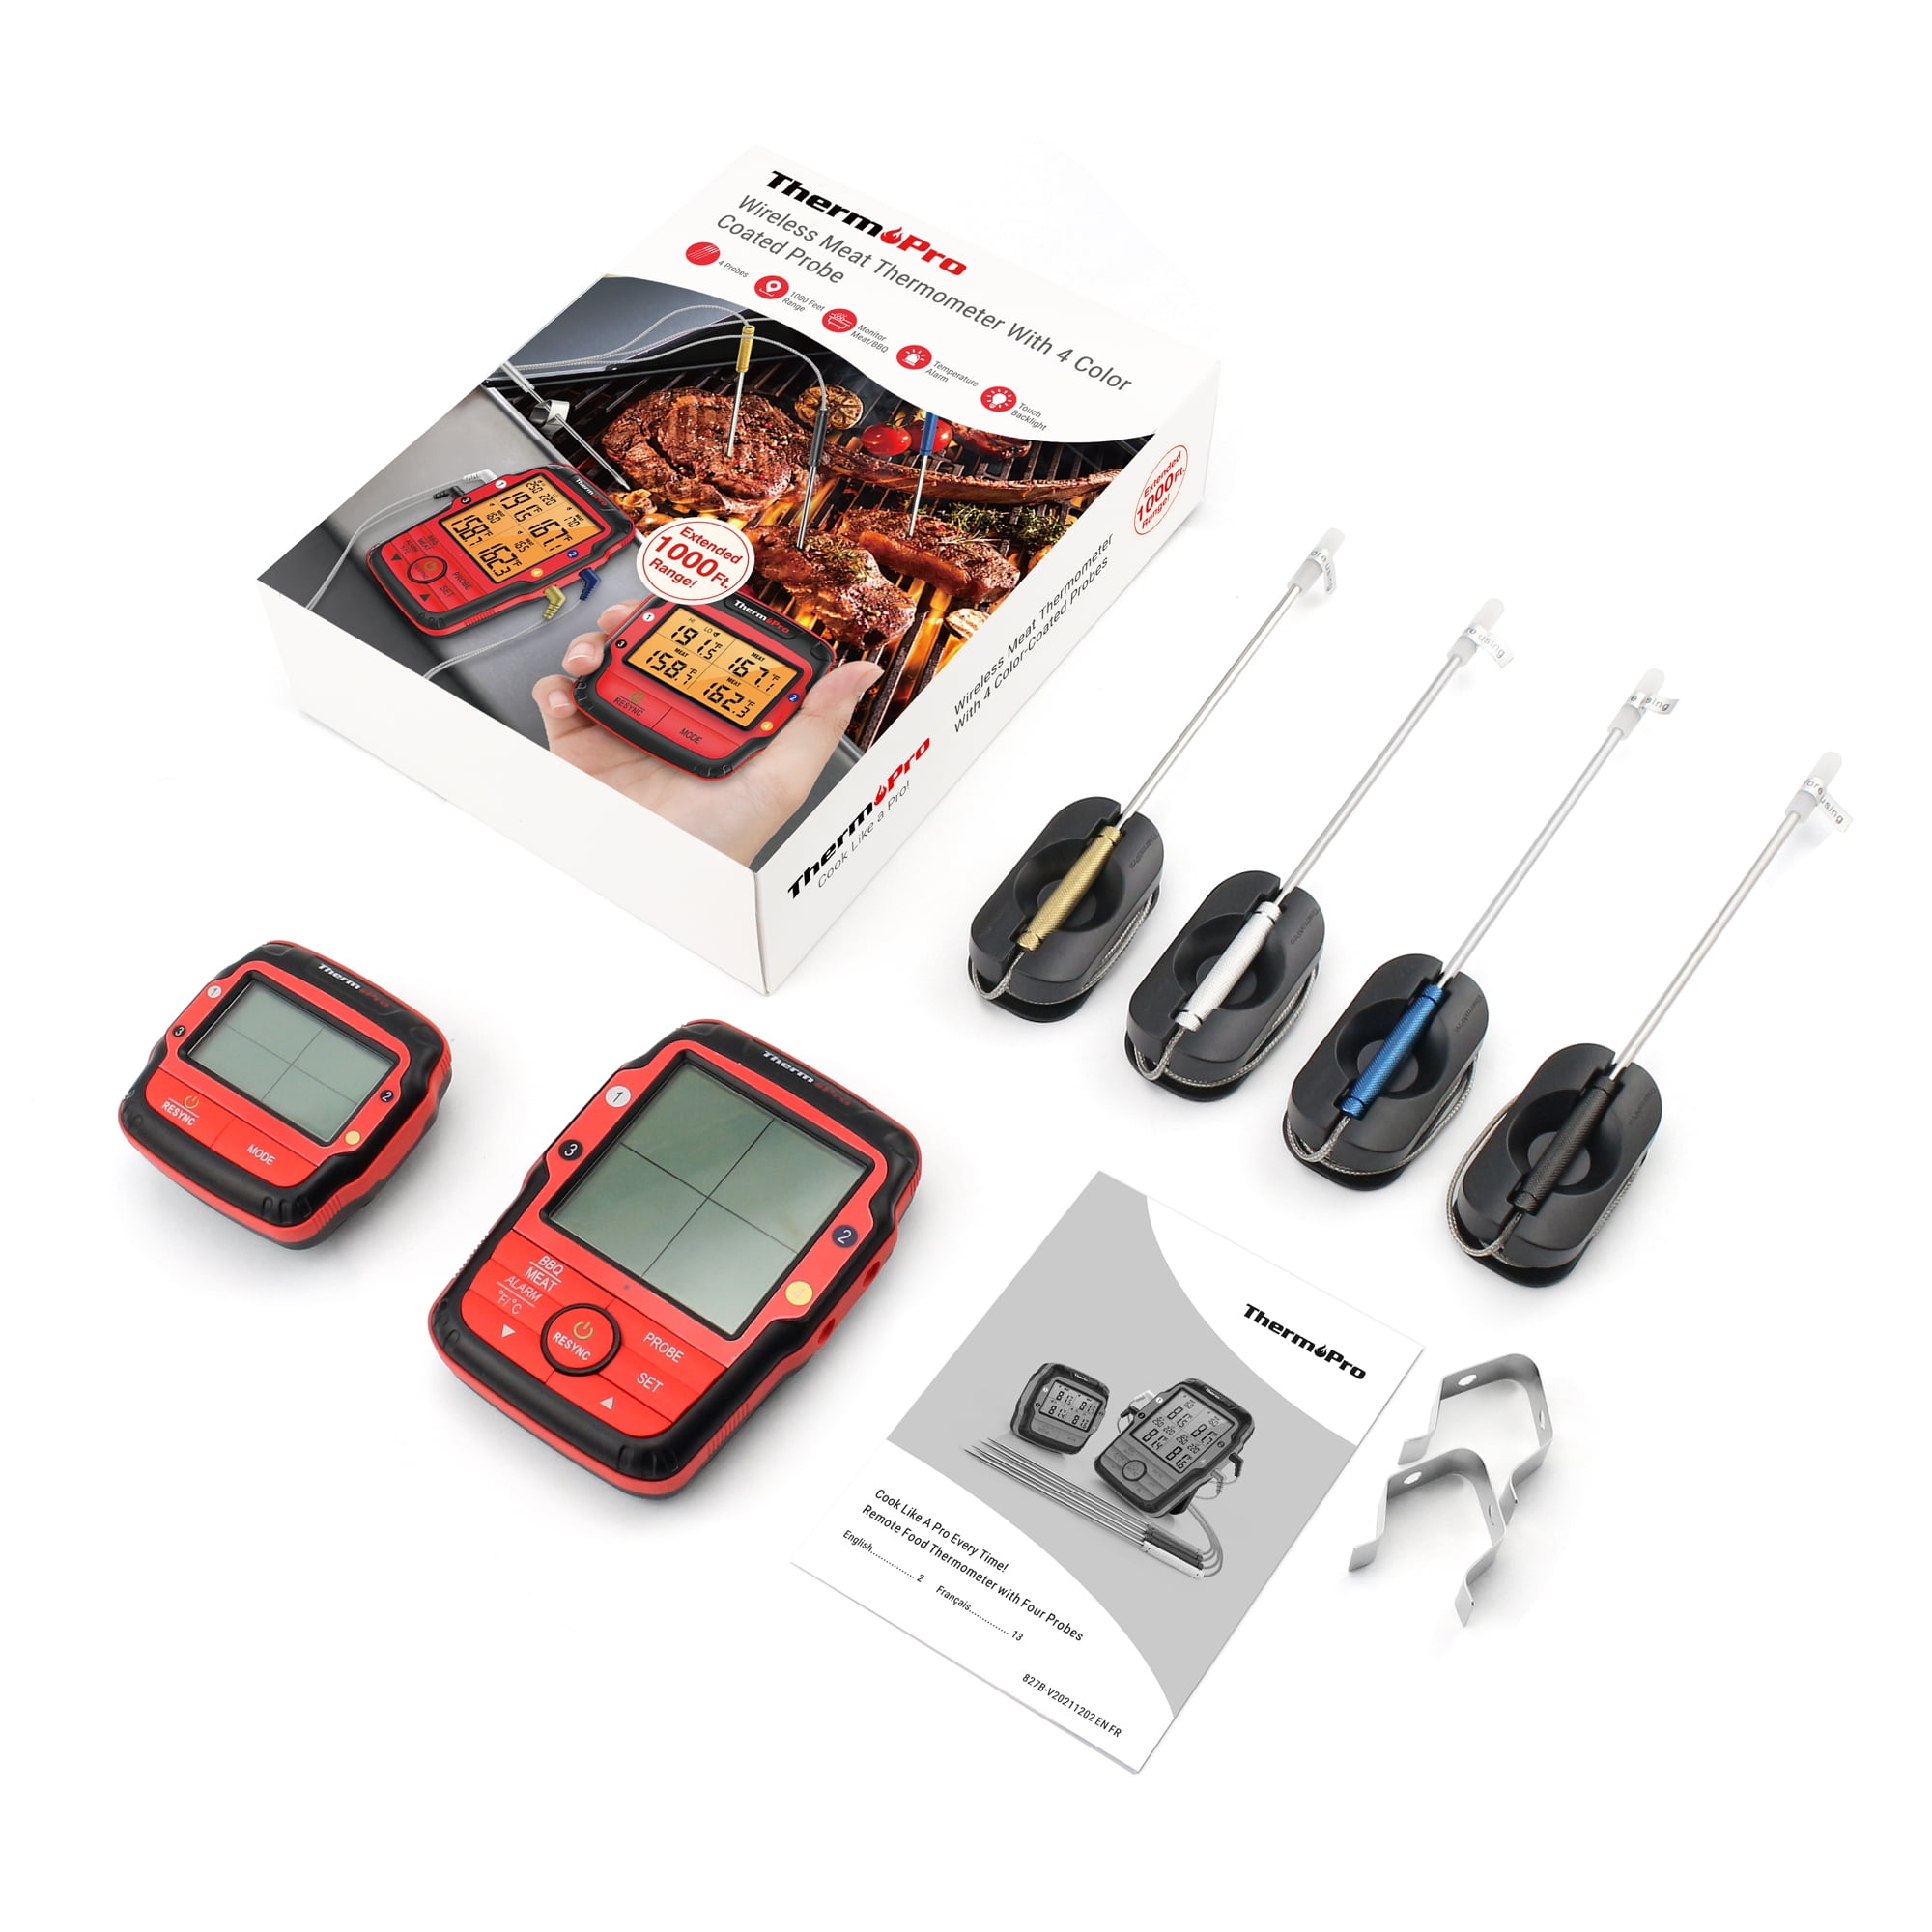  ThermoPro TP826 500FT Wireless Meat Thermometer, Dual Meat  Probe Cooking Thermometer with HI/Low Alert, IPX4 Food Grill Thermometer,  Outdoor Fryer Accessories for BBQ, Smoker, Oven, Grilling Gifts : Home &  Kitchen